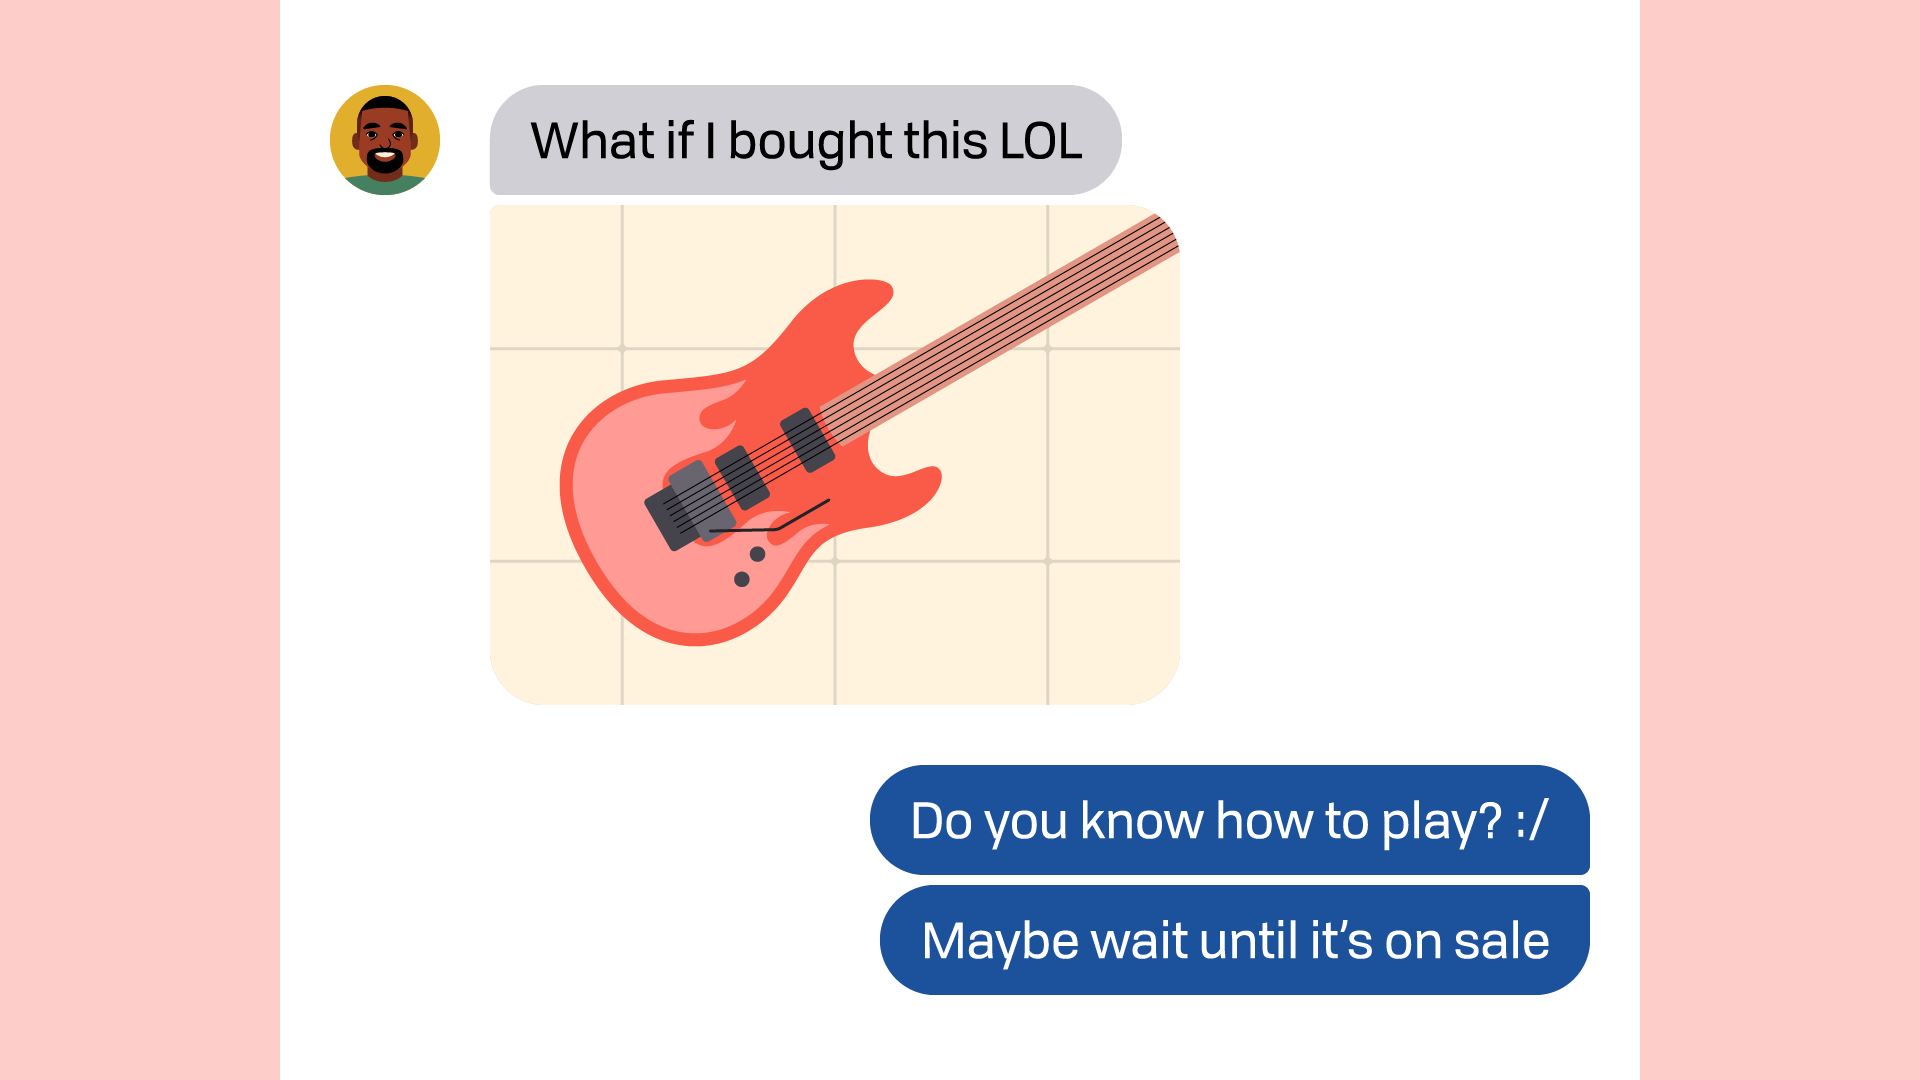 chat conversation - friend: "what if i bought this lol" / you: "do you know how to play? maybe wait until it's on sale"